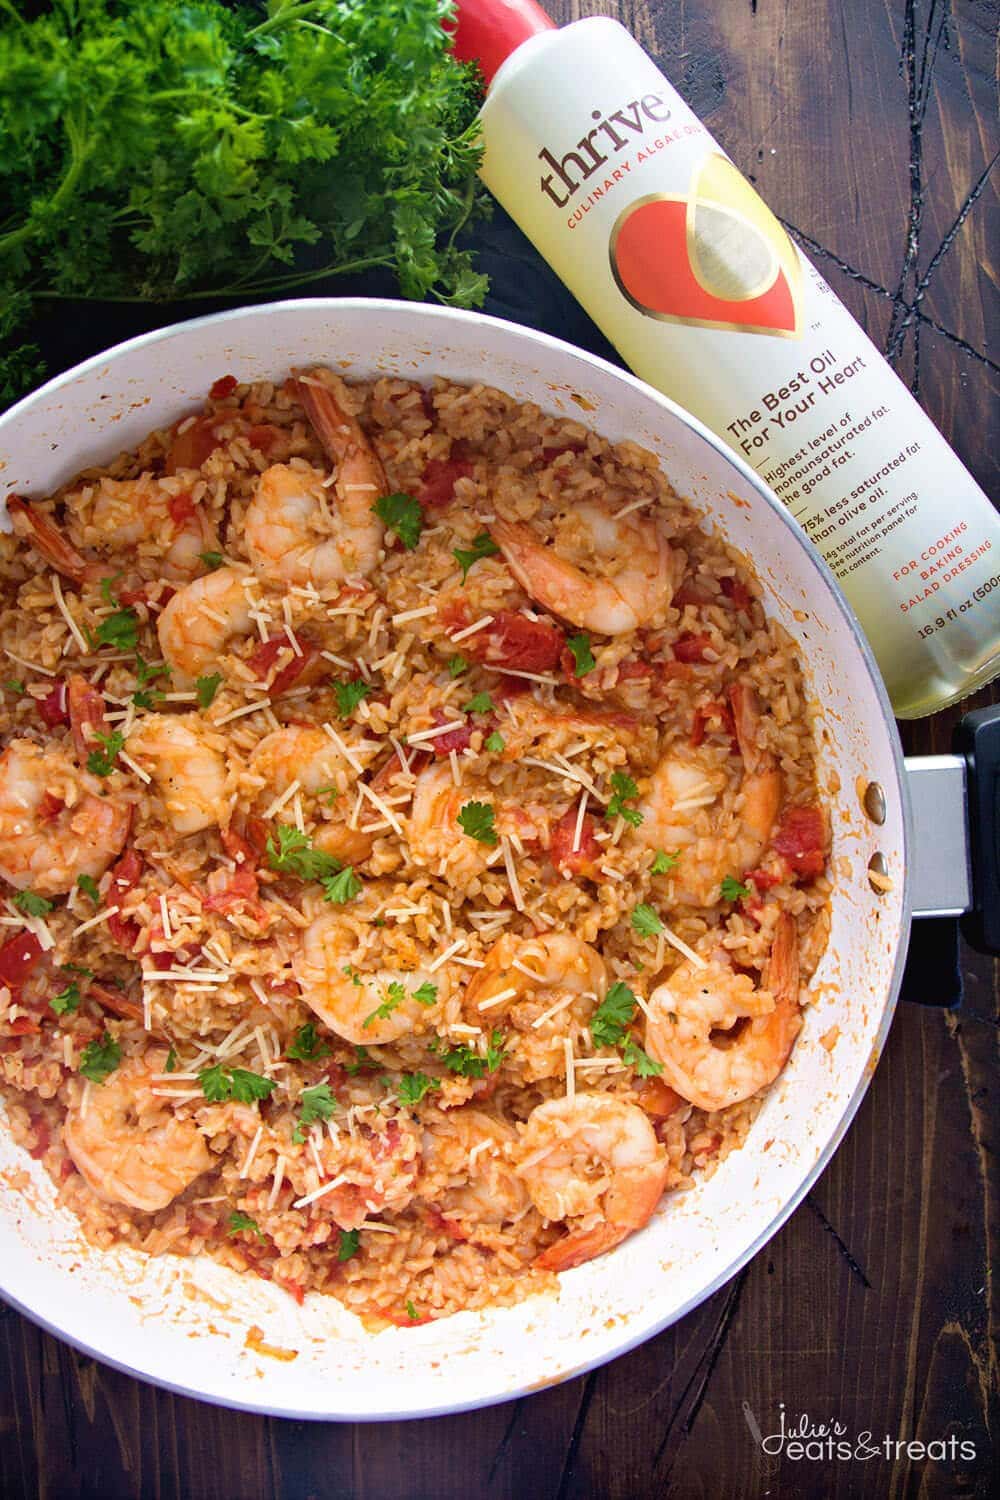 Light Italian Shrimp & Rice Skillet Recipe ~ Easy, One Pot Meal that's Full of Flavor! This has it all from Garlic, to Shrimp, Rice and Italian Tomatoes! This is the Perfect Dinner Ready in 30 Minutes!